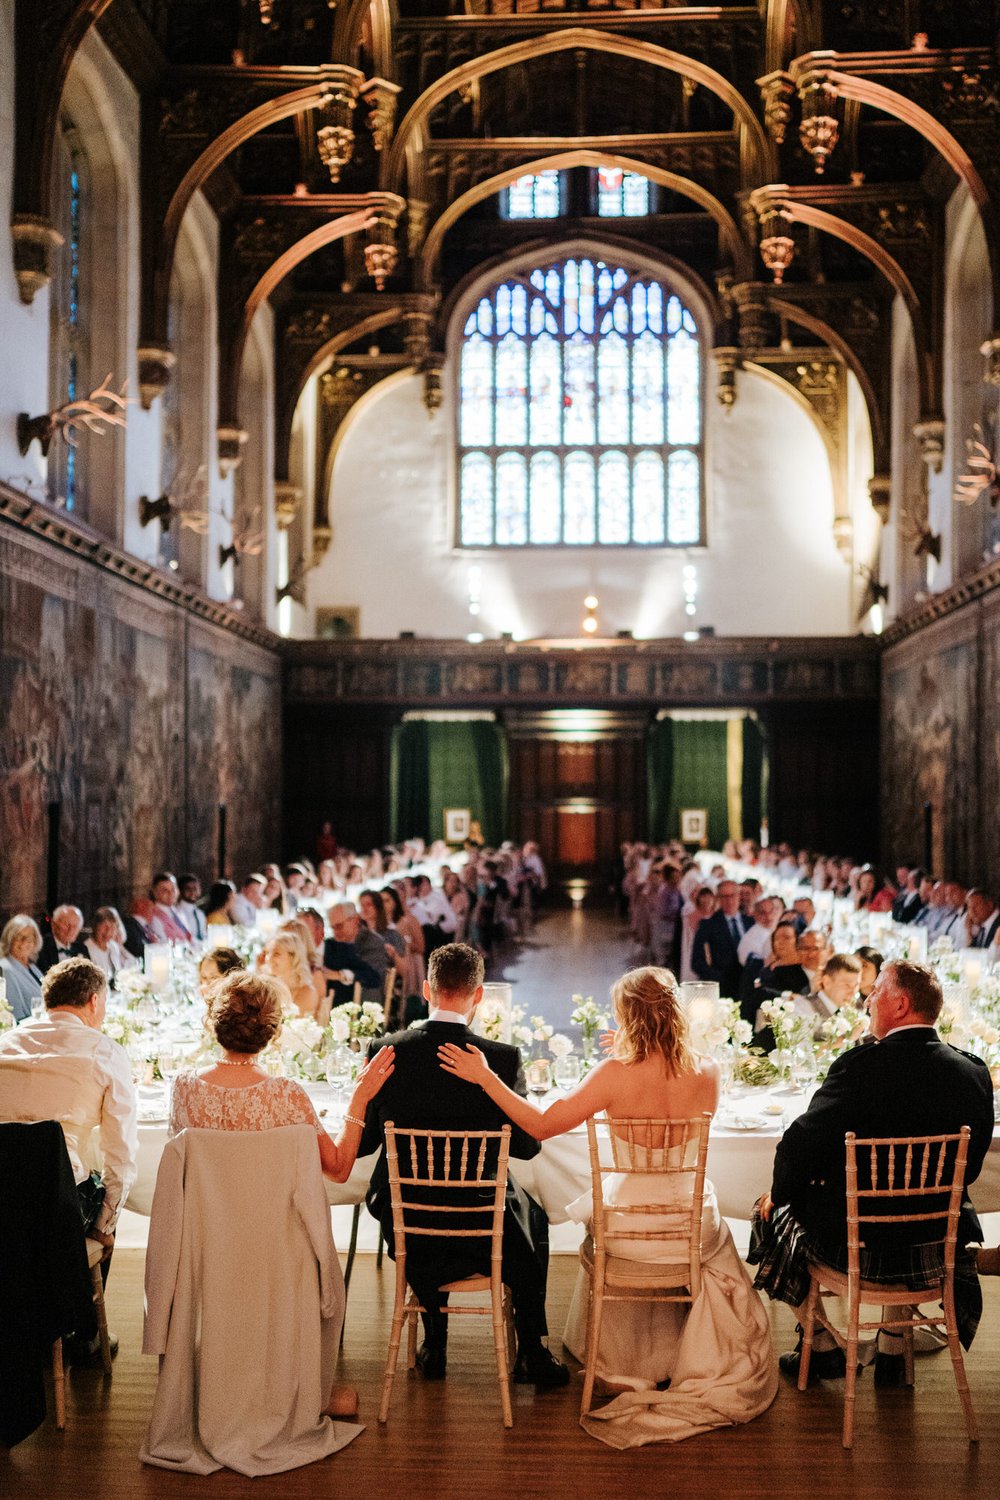 Epic Hampton Court Palace Great Hall is the backdrop for touching photo as groom finishes his speech and both bride and mother of the groom's hand rest on his back 